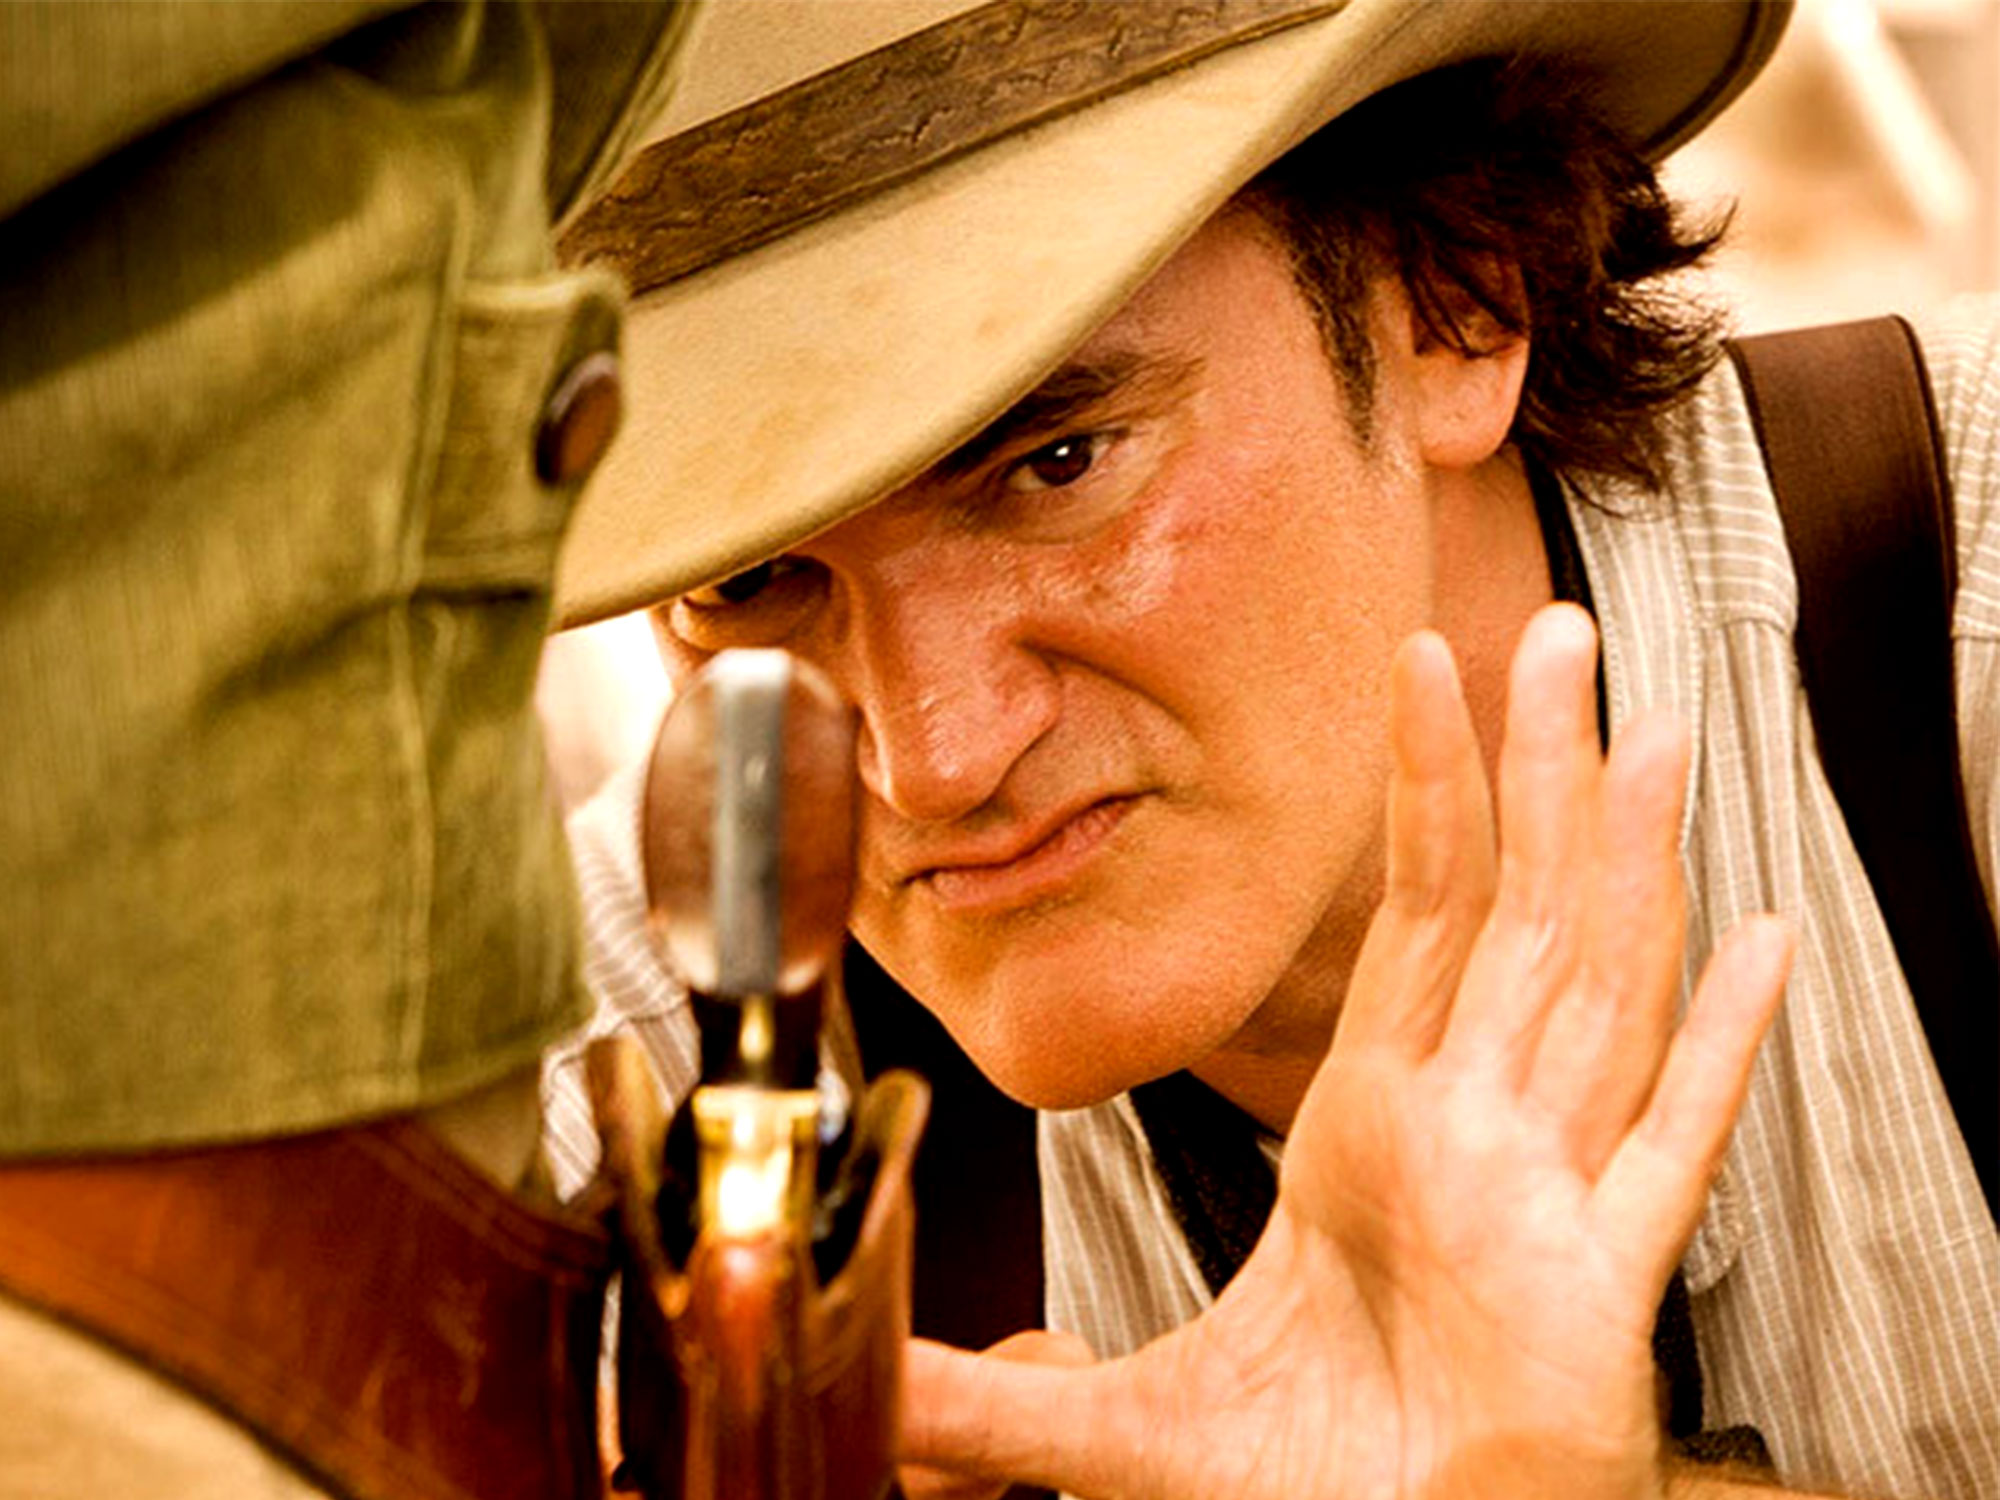 On ‘Cinema Speculation’ – Quentin Tarantino’s loopy book of film